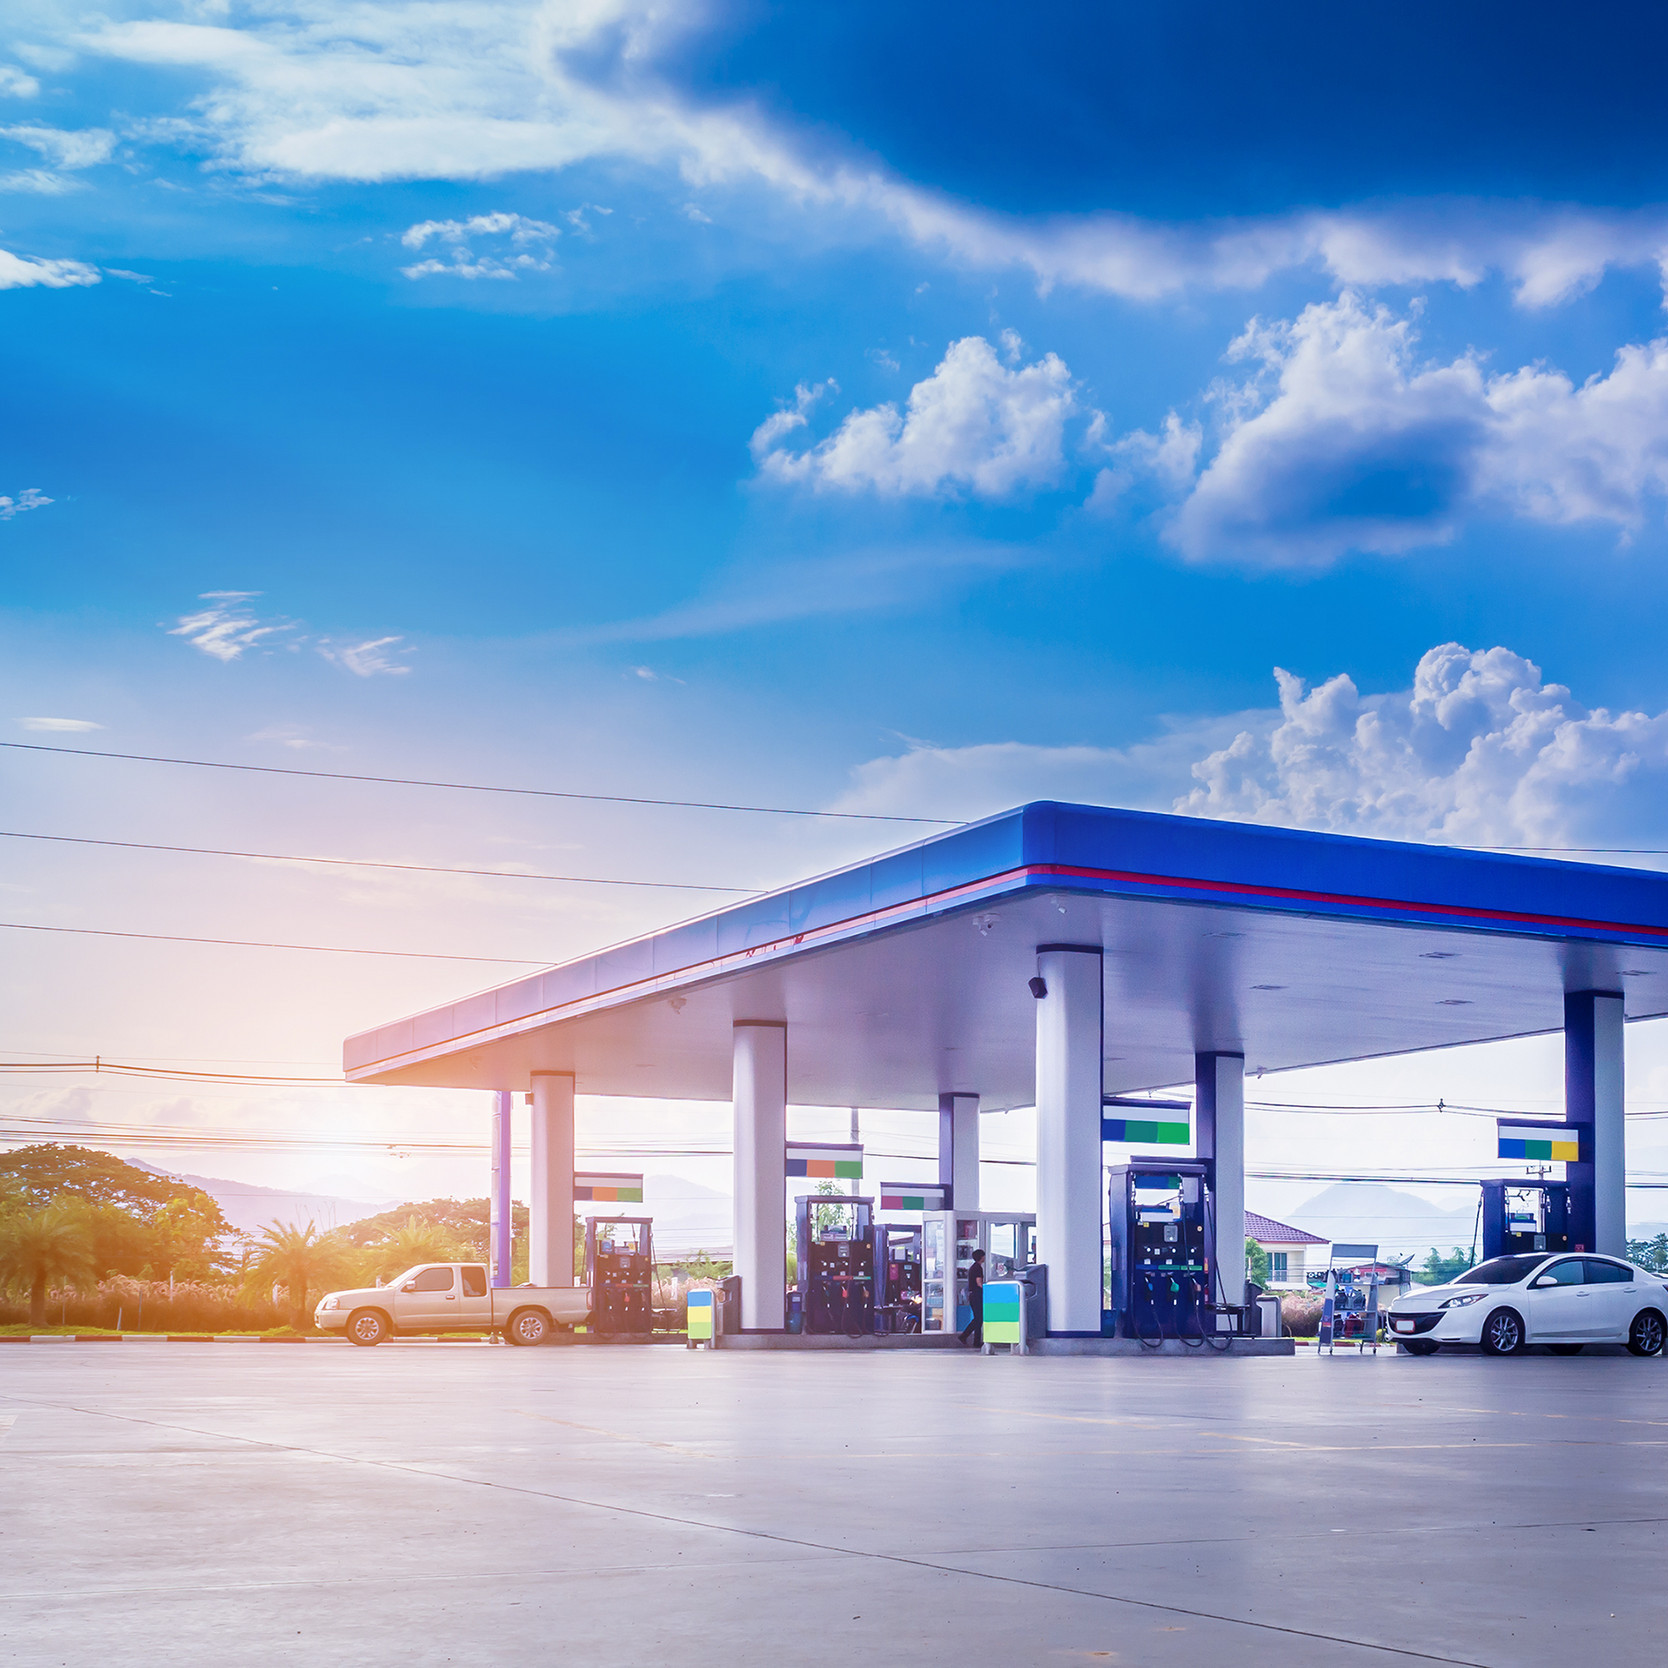 Gas,Fuel,Station,With,Clouds,And,Blue,Sky